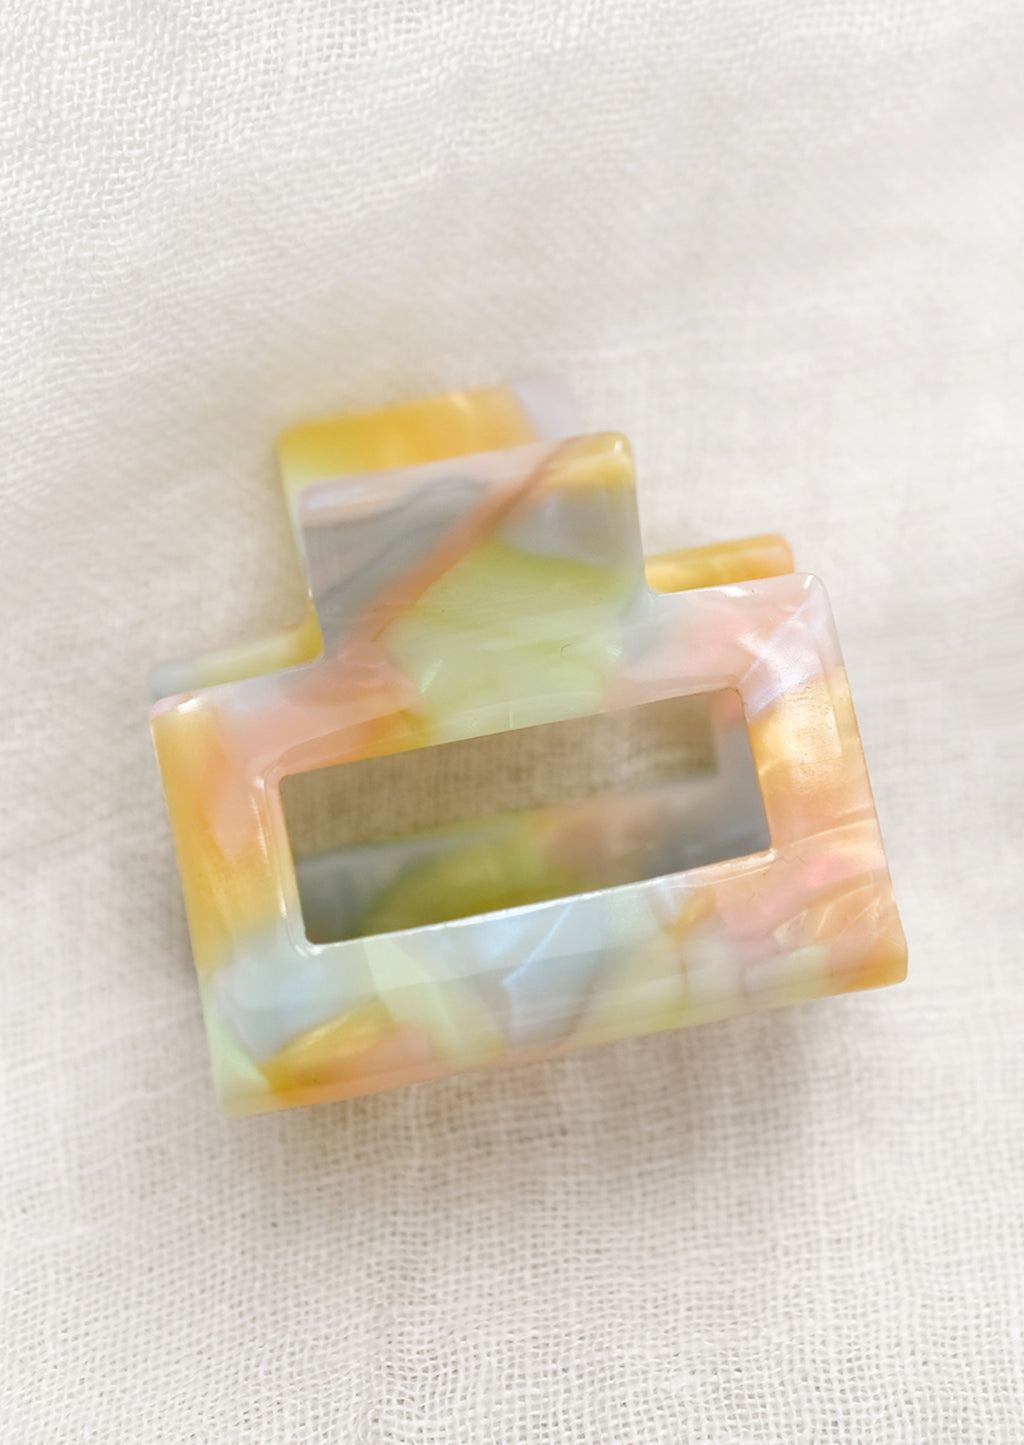 Small: A small hair claw in pastel, prismatic colors.